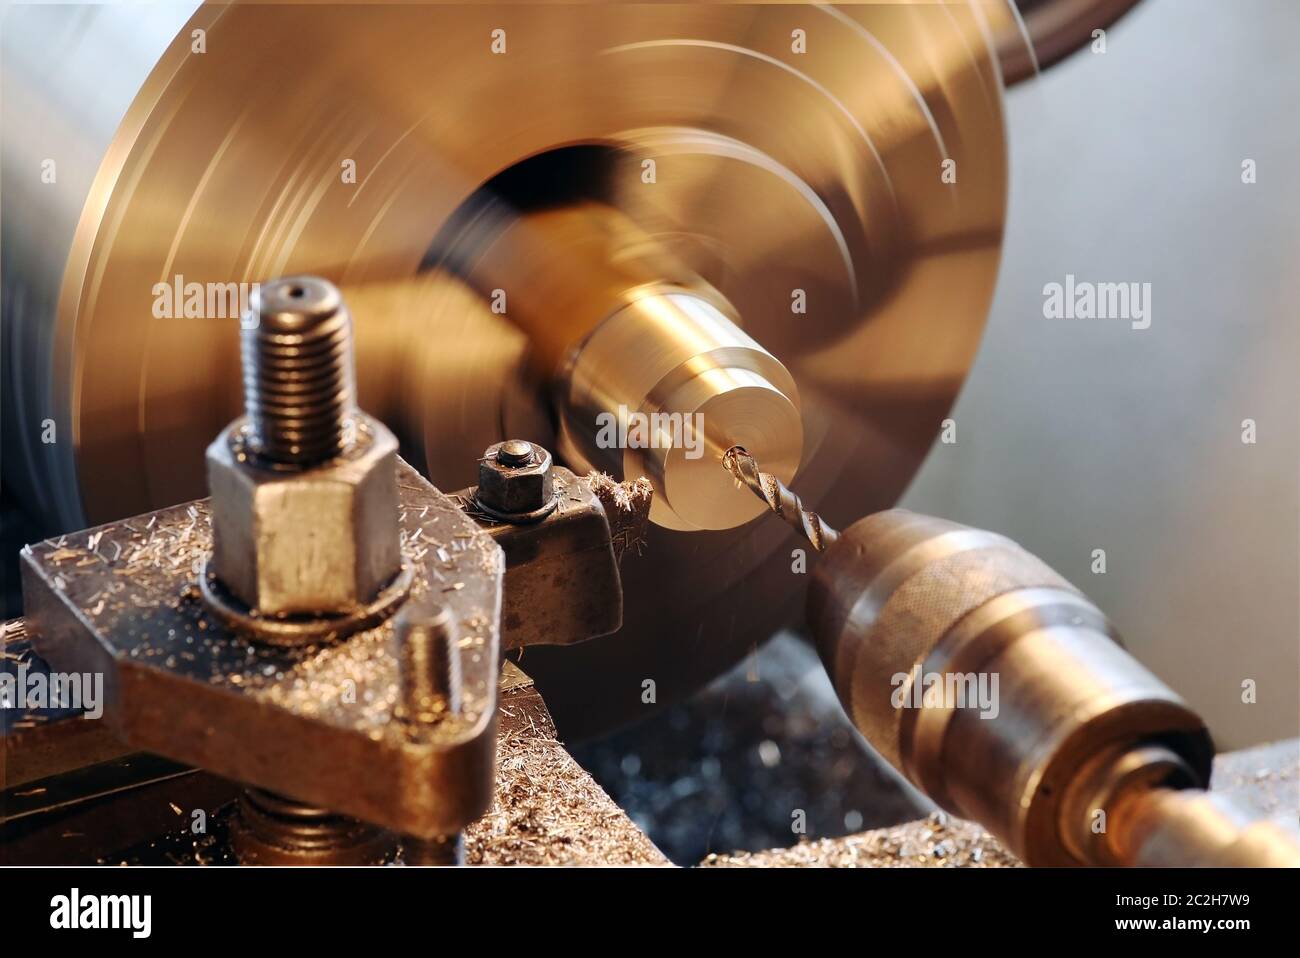 Production of a workpiece on the lathe Stock Photo